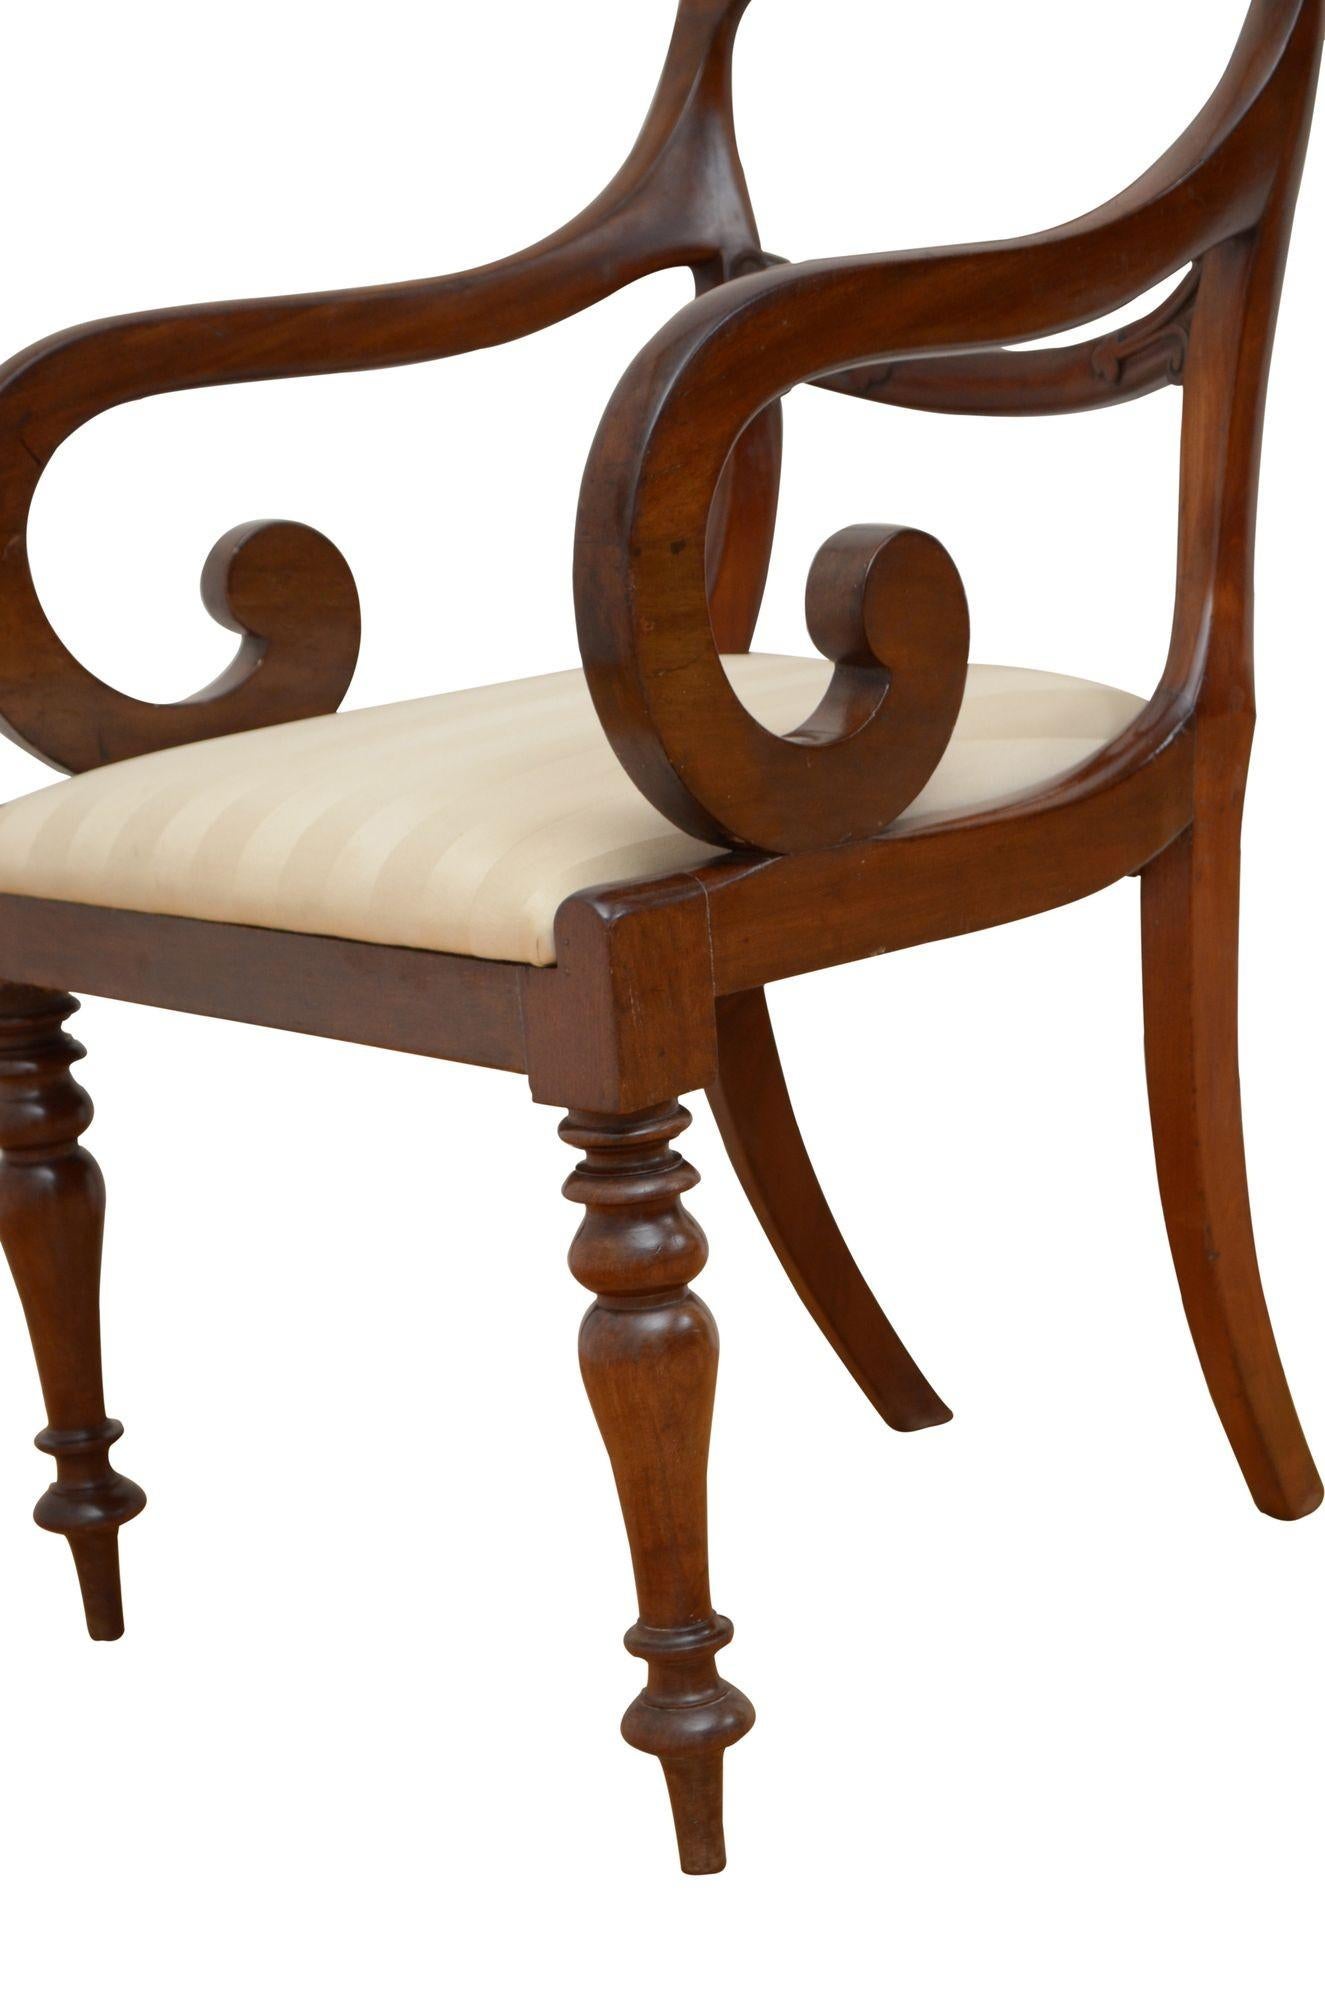 19th Century William IV Desk Chair Carver Chair Office Chair Elbow Chair For Sale